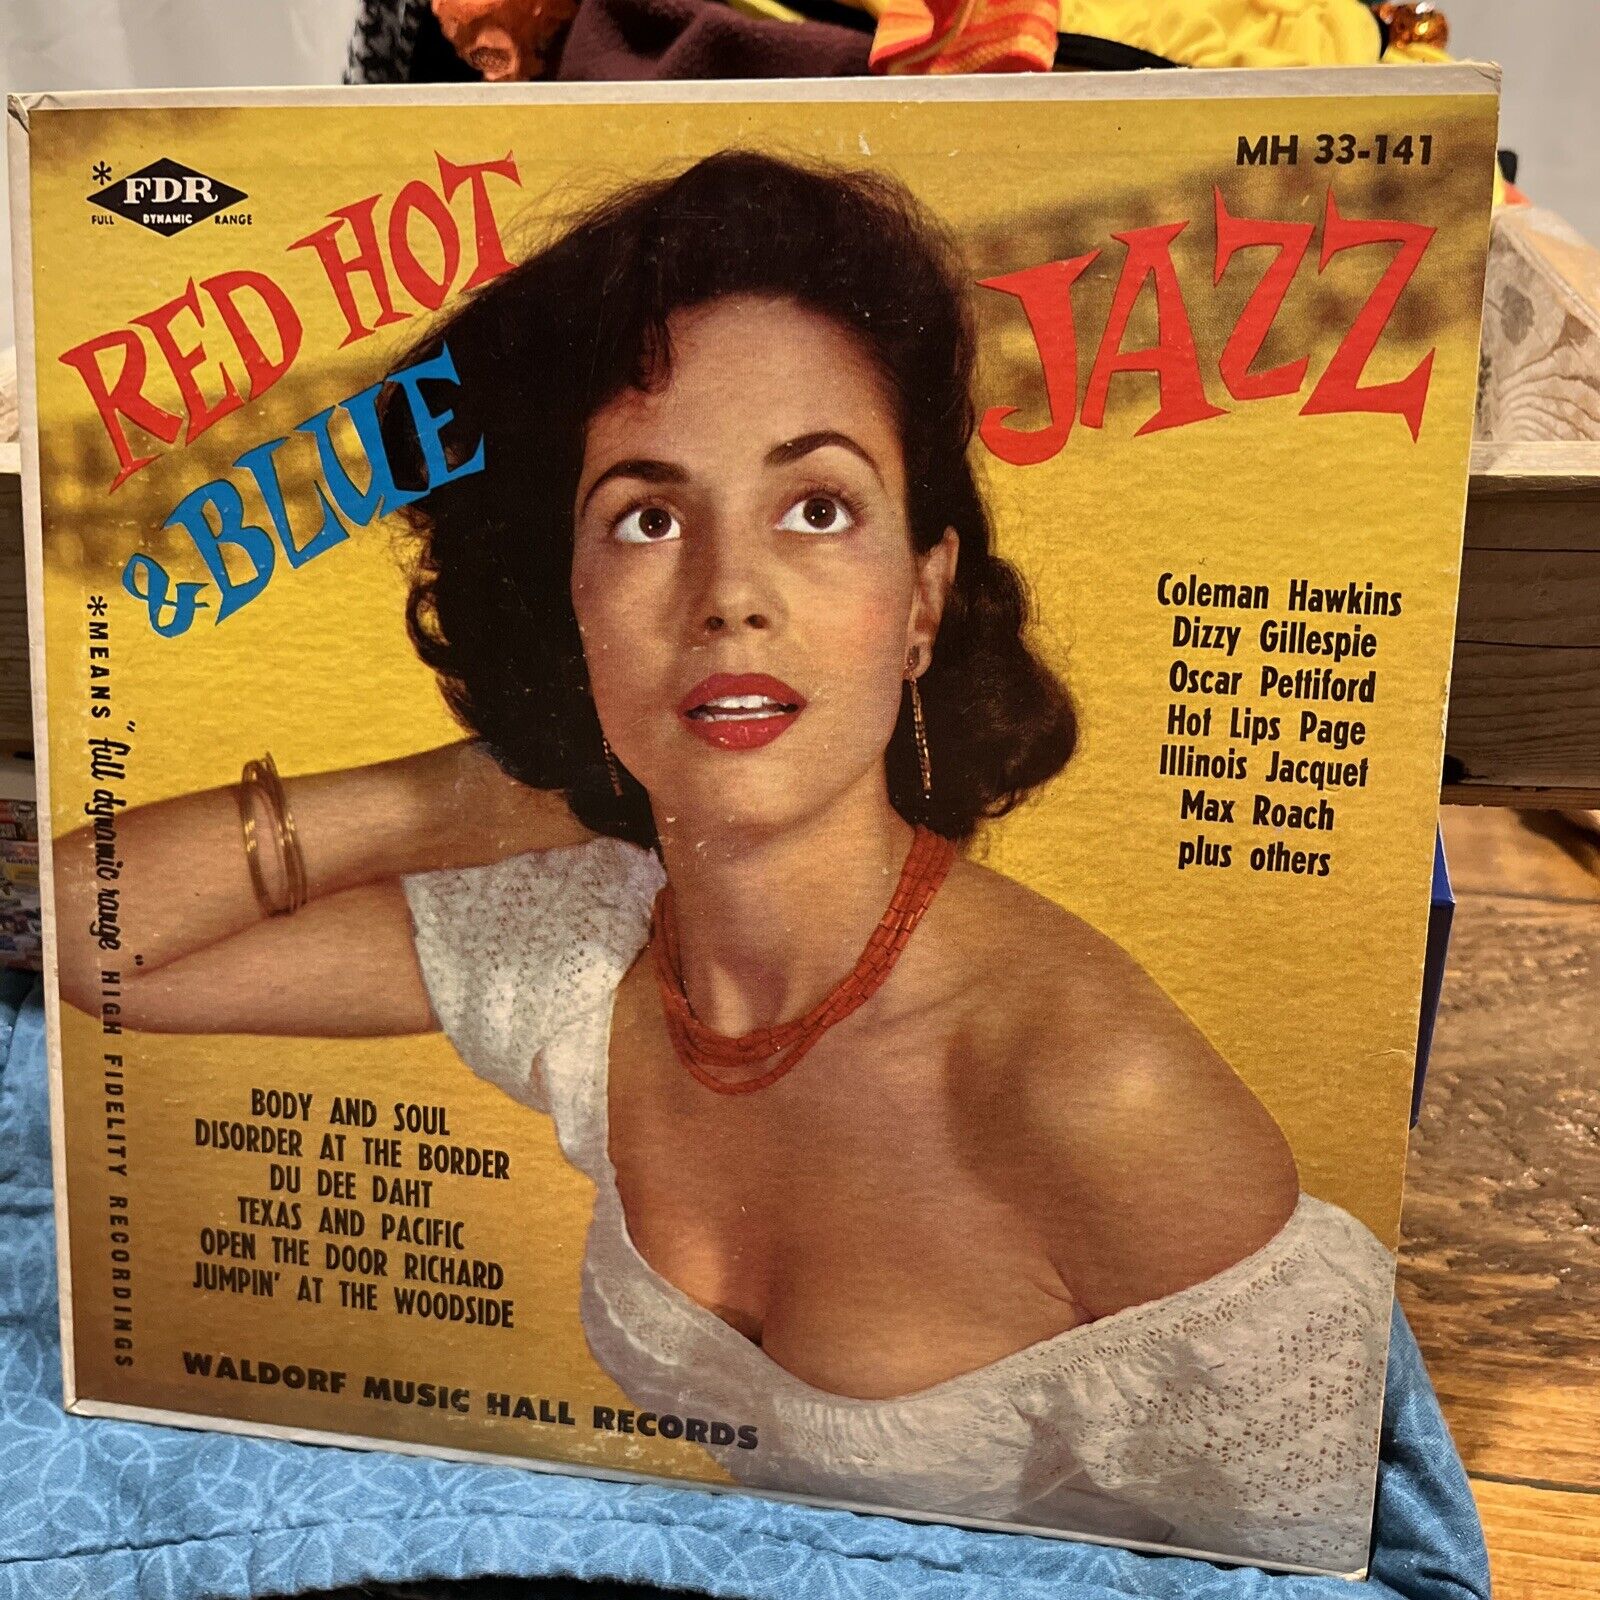 Jazz Red Hot & Blue 10” 33 Waldorf Music MH 33-141 Hawkins, Vibrant Cover Pic